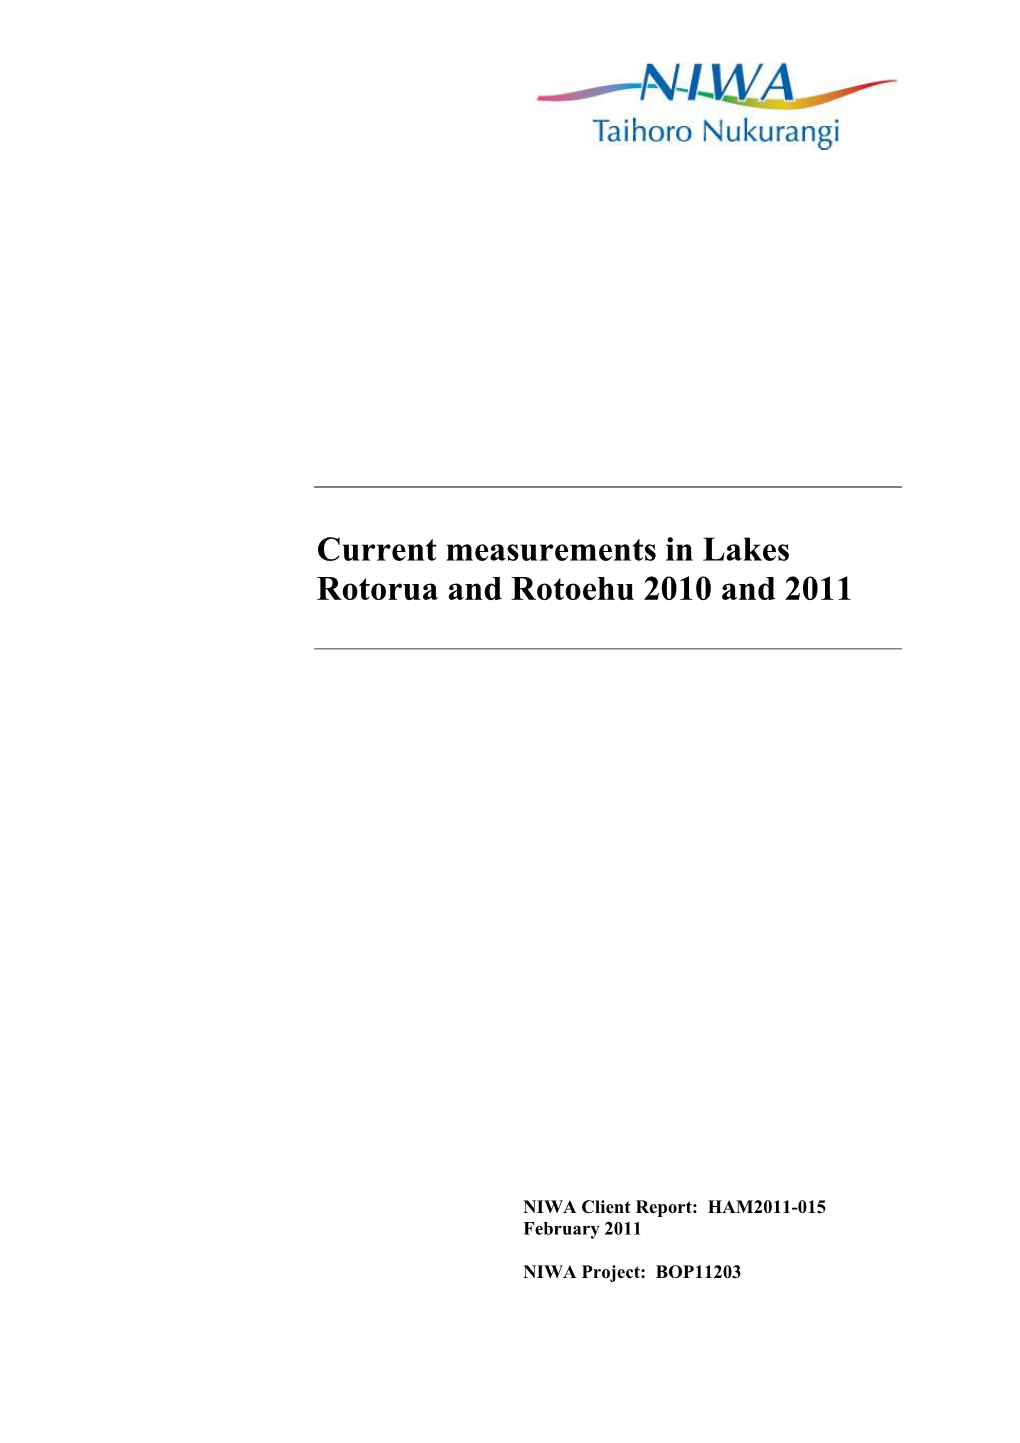 Current Measurements in Lakes Rotorua and Rotoehu 2010 and 2011